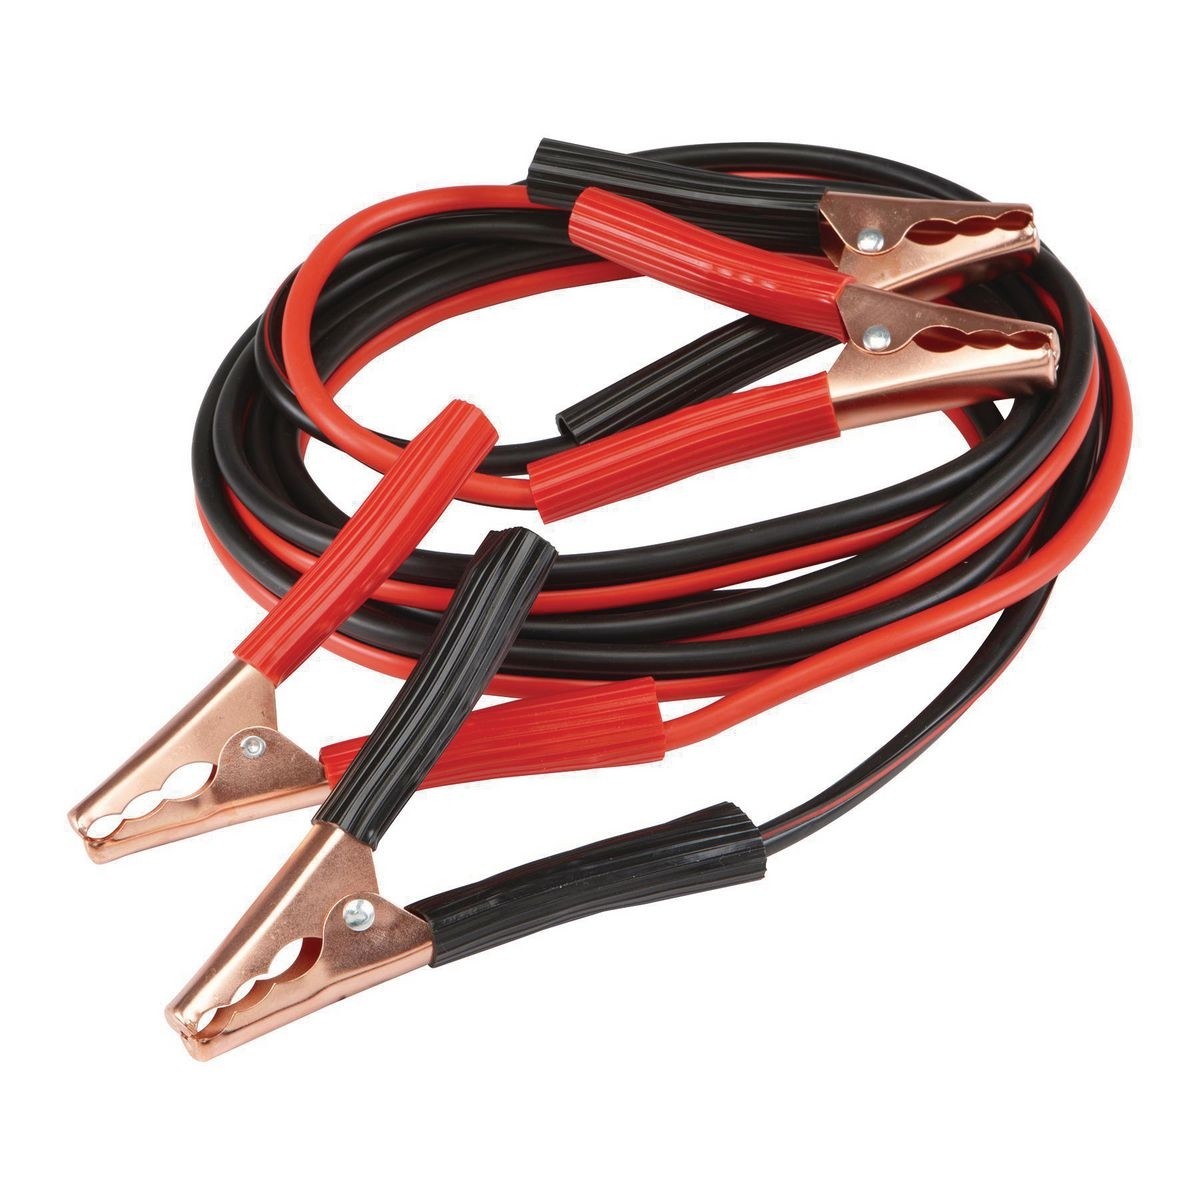 EverStart 16 Foot 6 Gauge, Automotive Booster Cables, Black and Red 